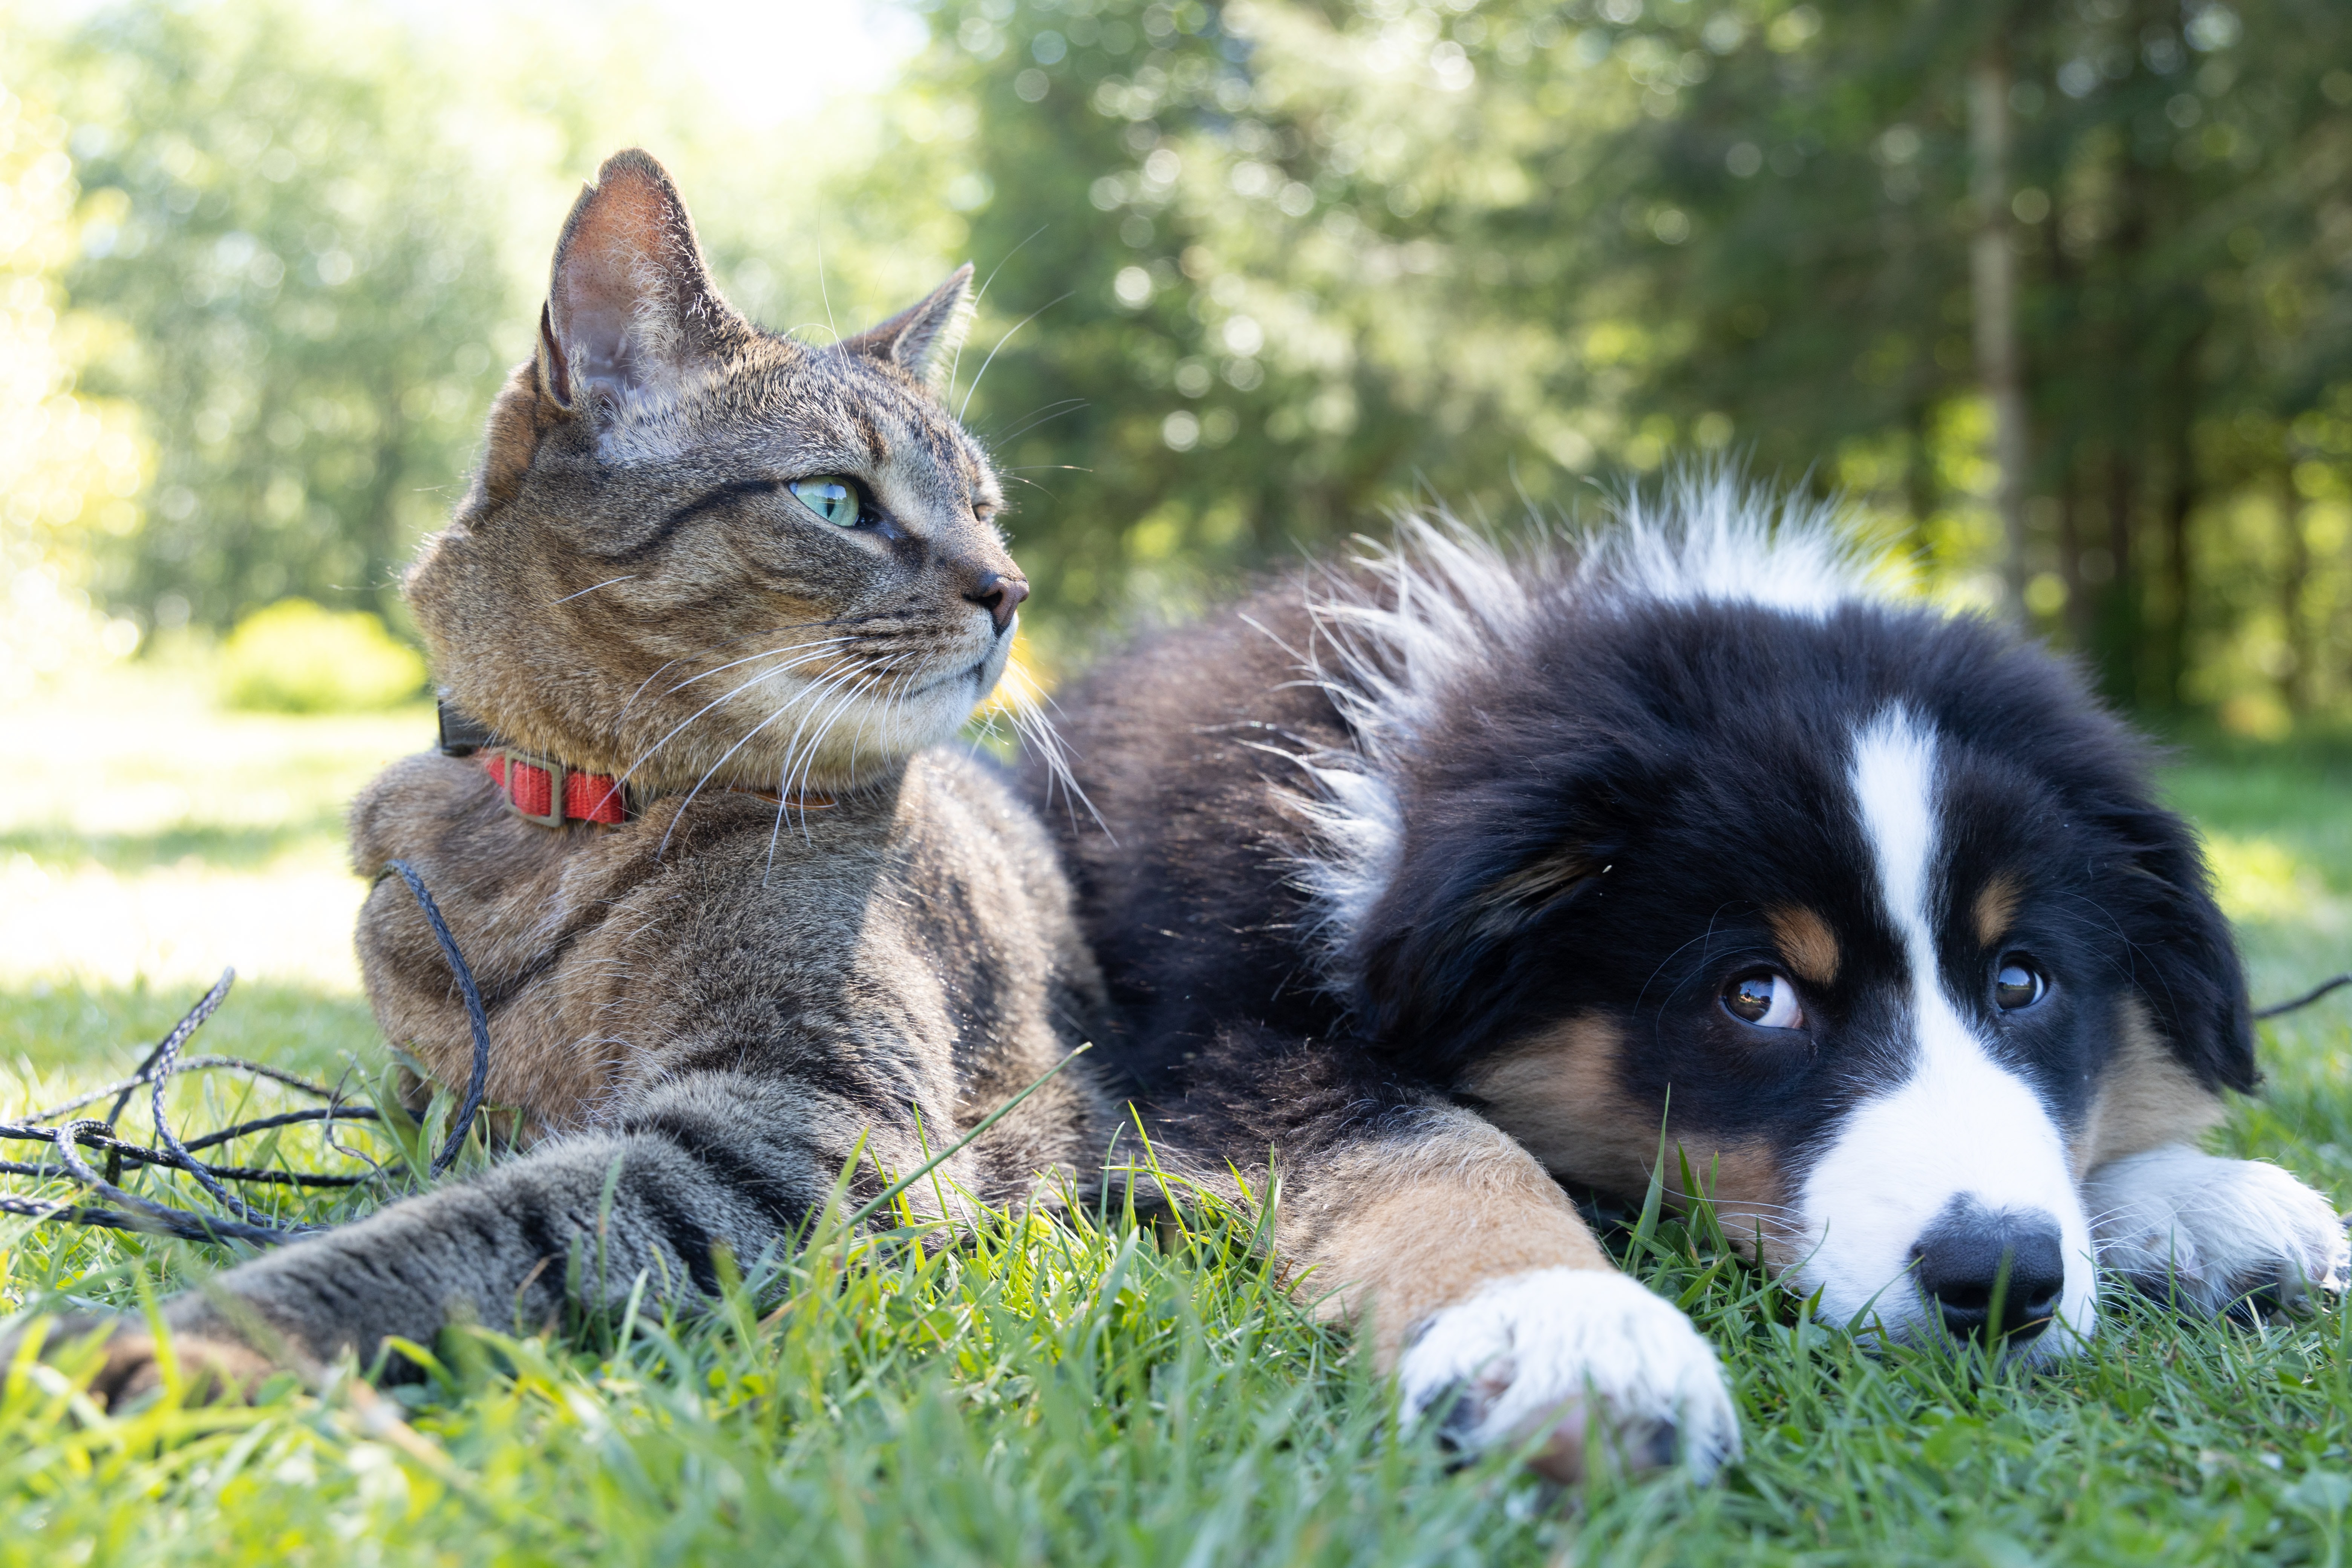 Dog and Cat lying on grass